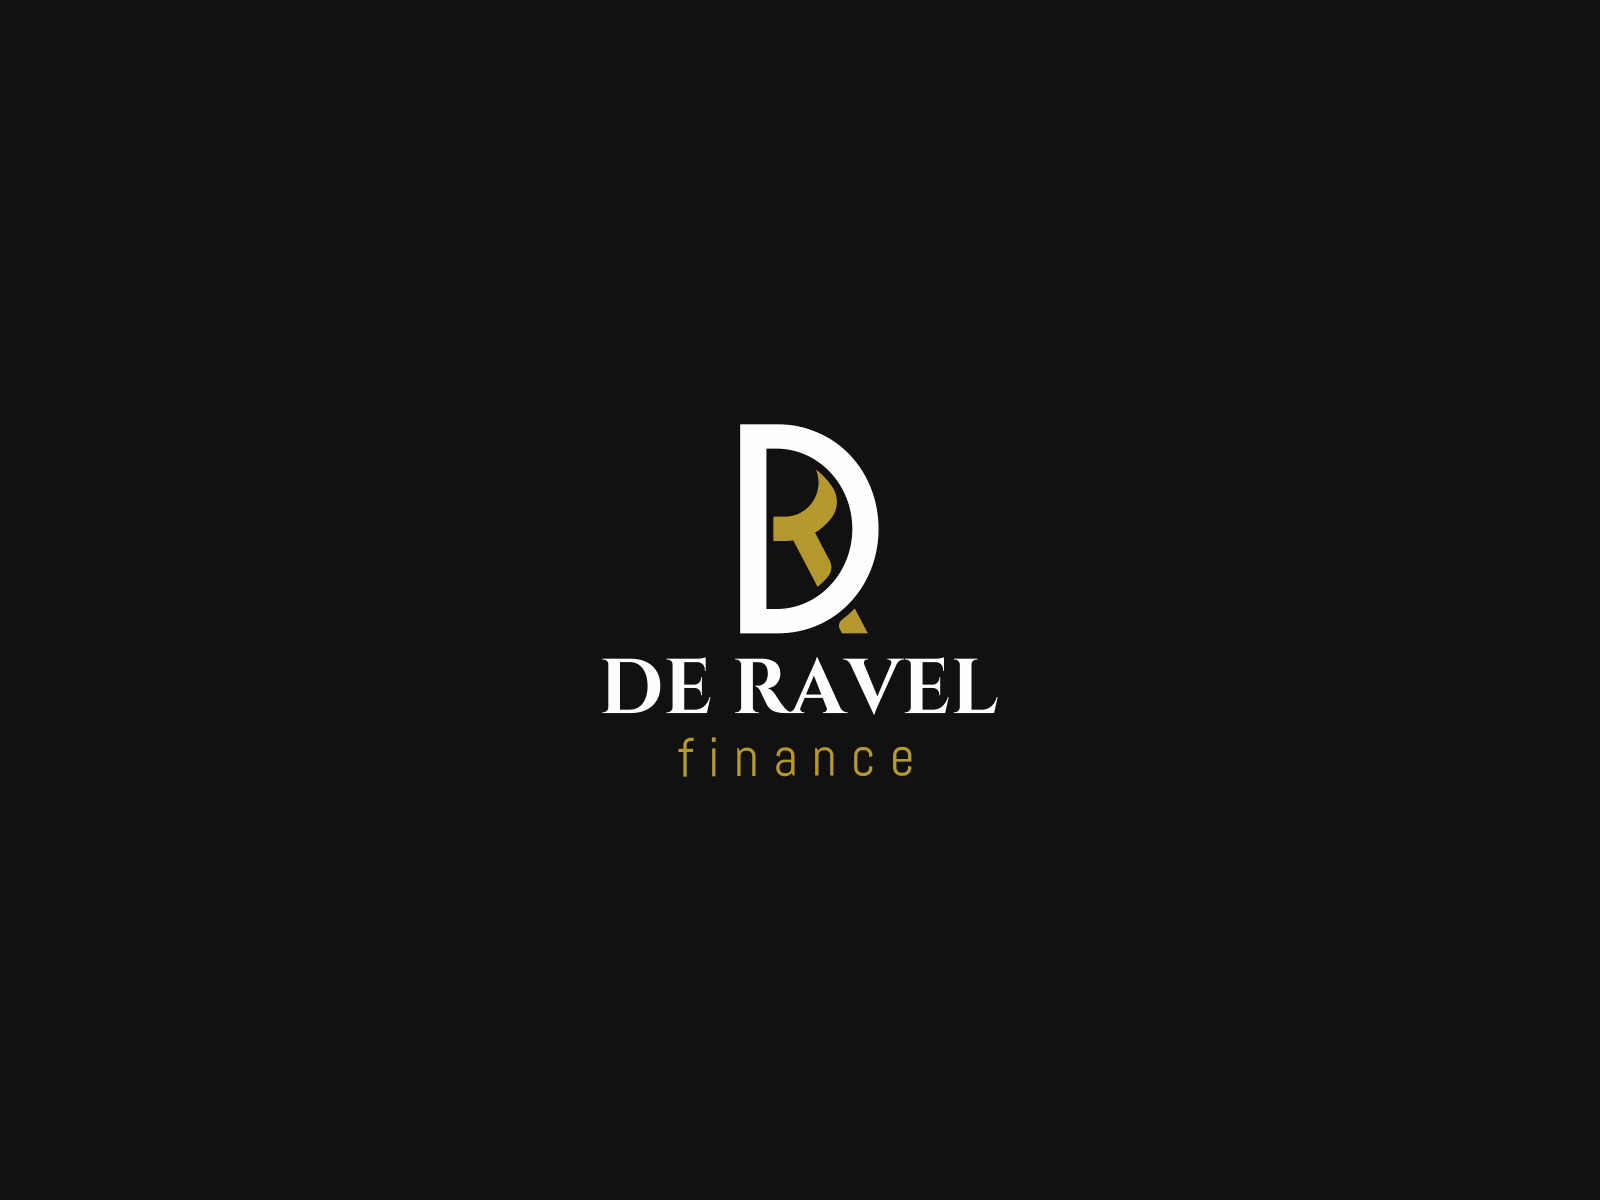 DrRavel Finance Logo Animation 2d an after effects animated logo animated logos animation animation 2d animation after effects animation design animation logo logo animated logo animation logo animations motion motion graphics